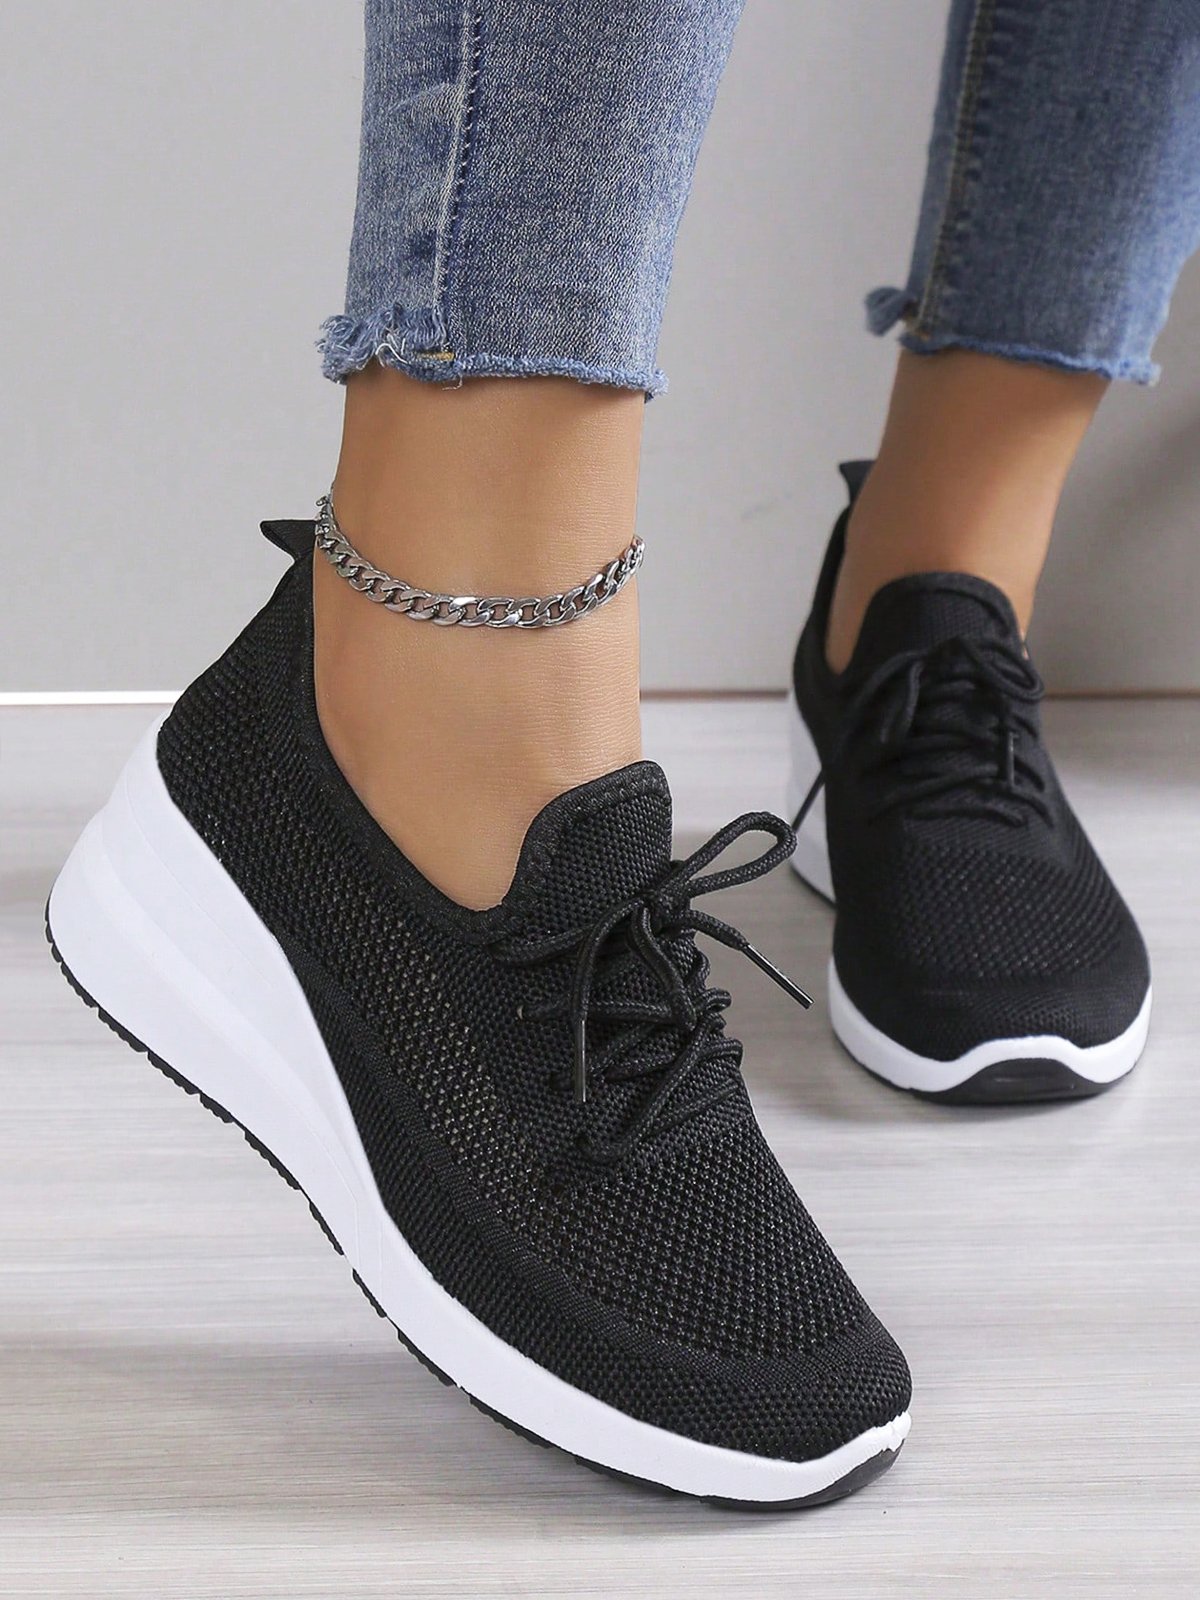 Casual Lace-up Decor Breathable Flyknit Wedge Heel Slip On Sneakers ...